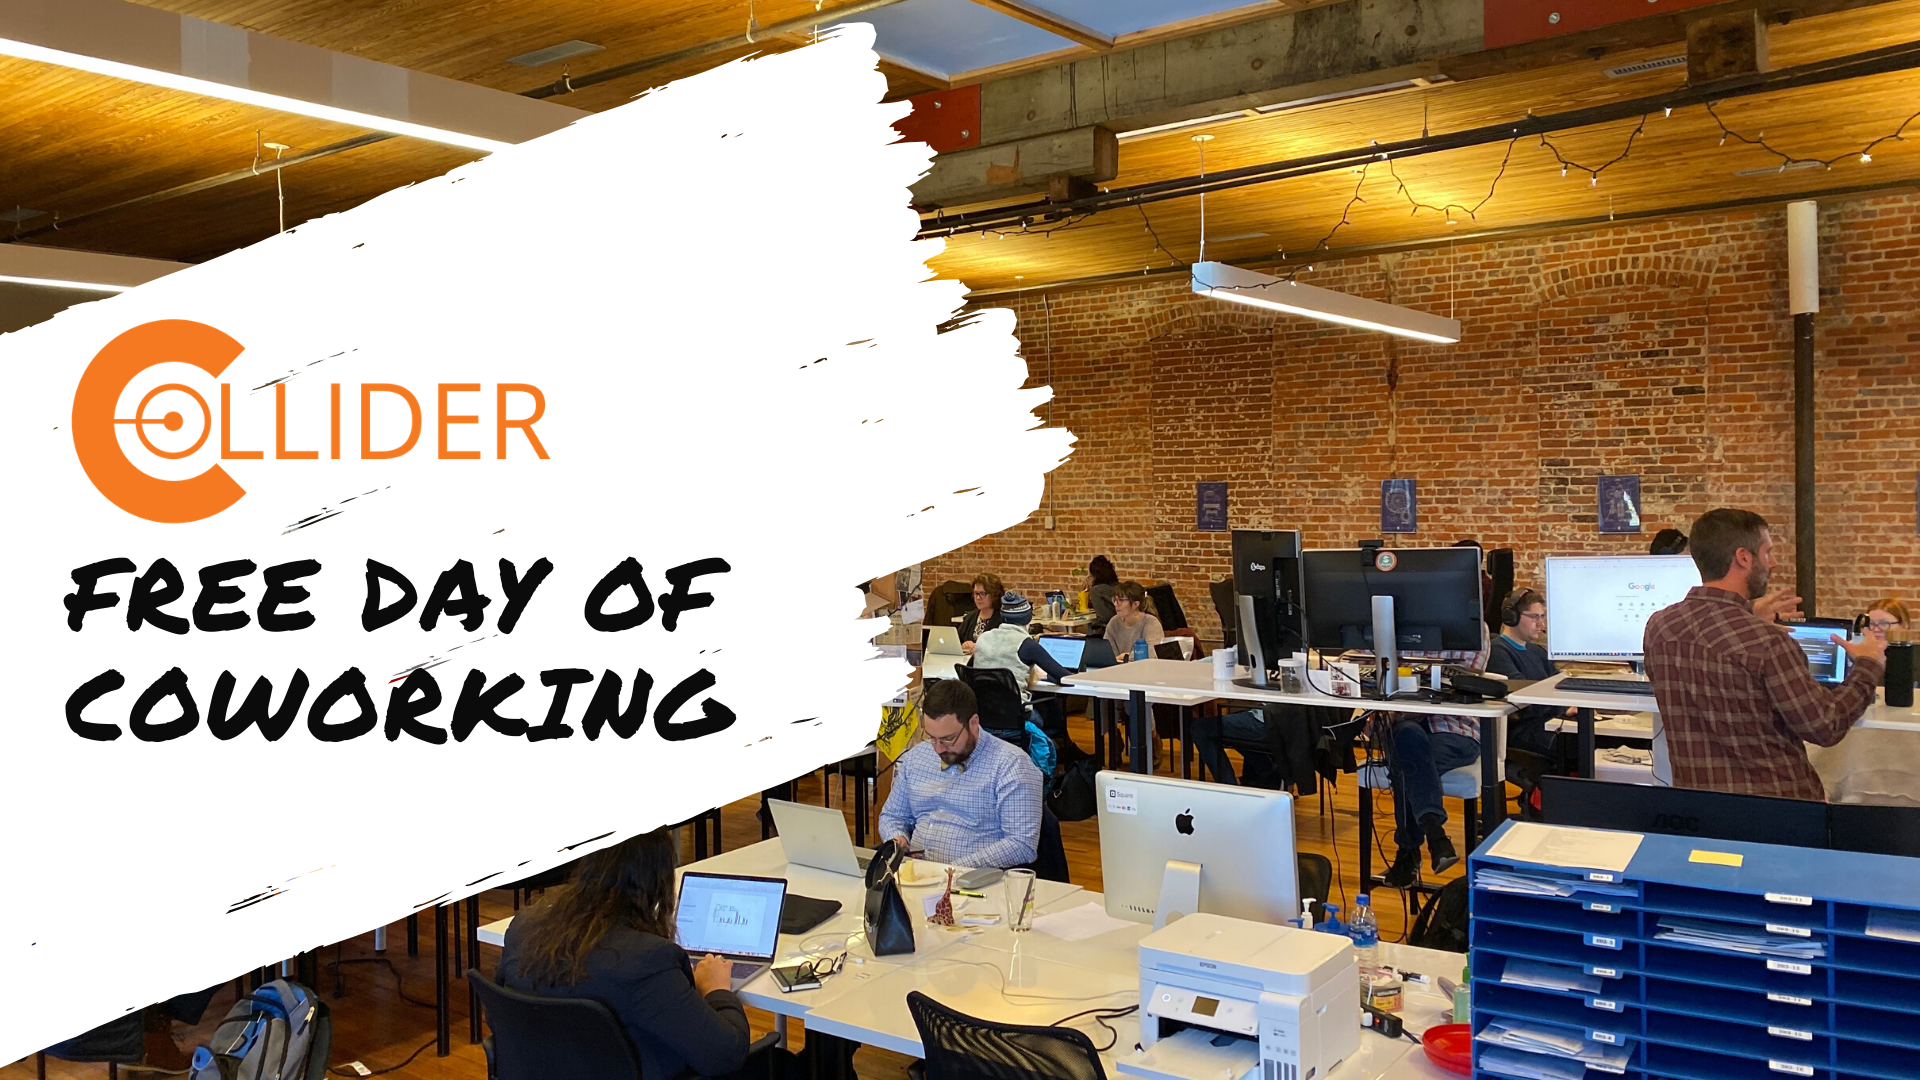 Collider Coworking Free Day of Coworking